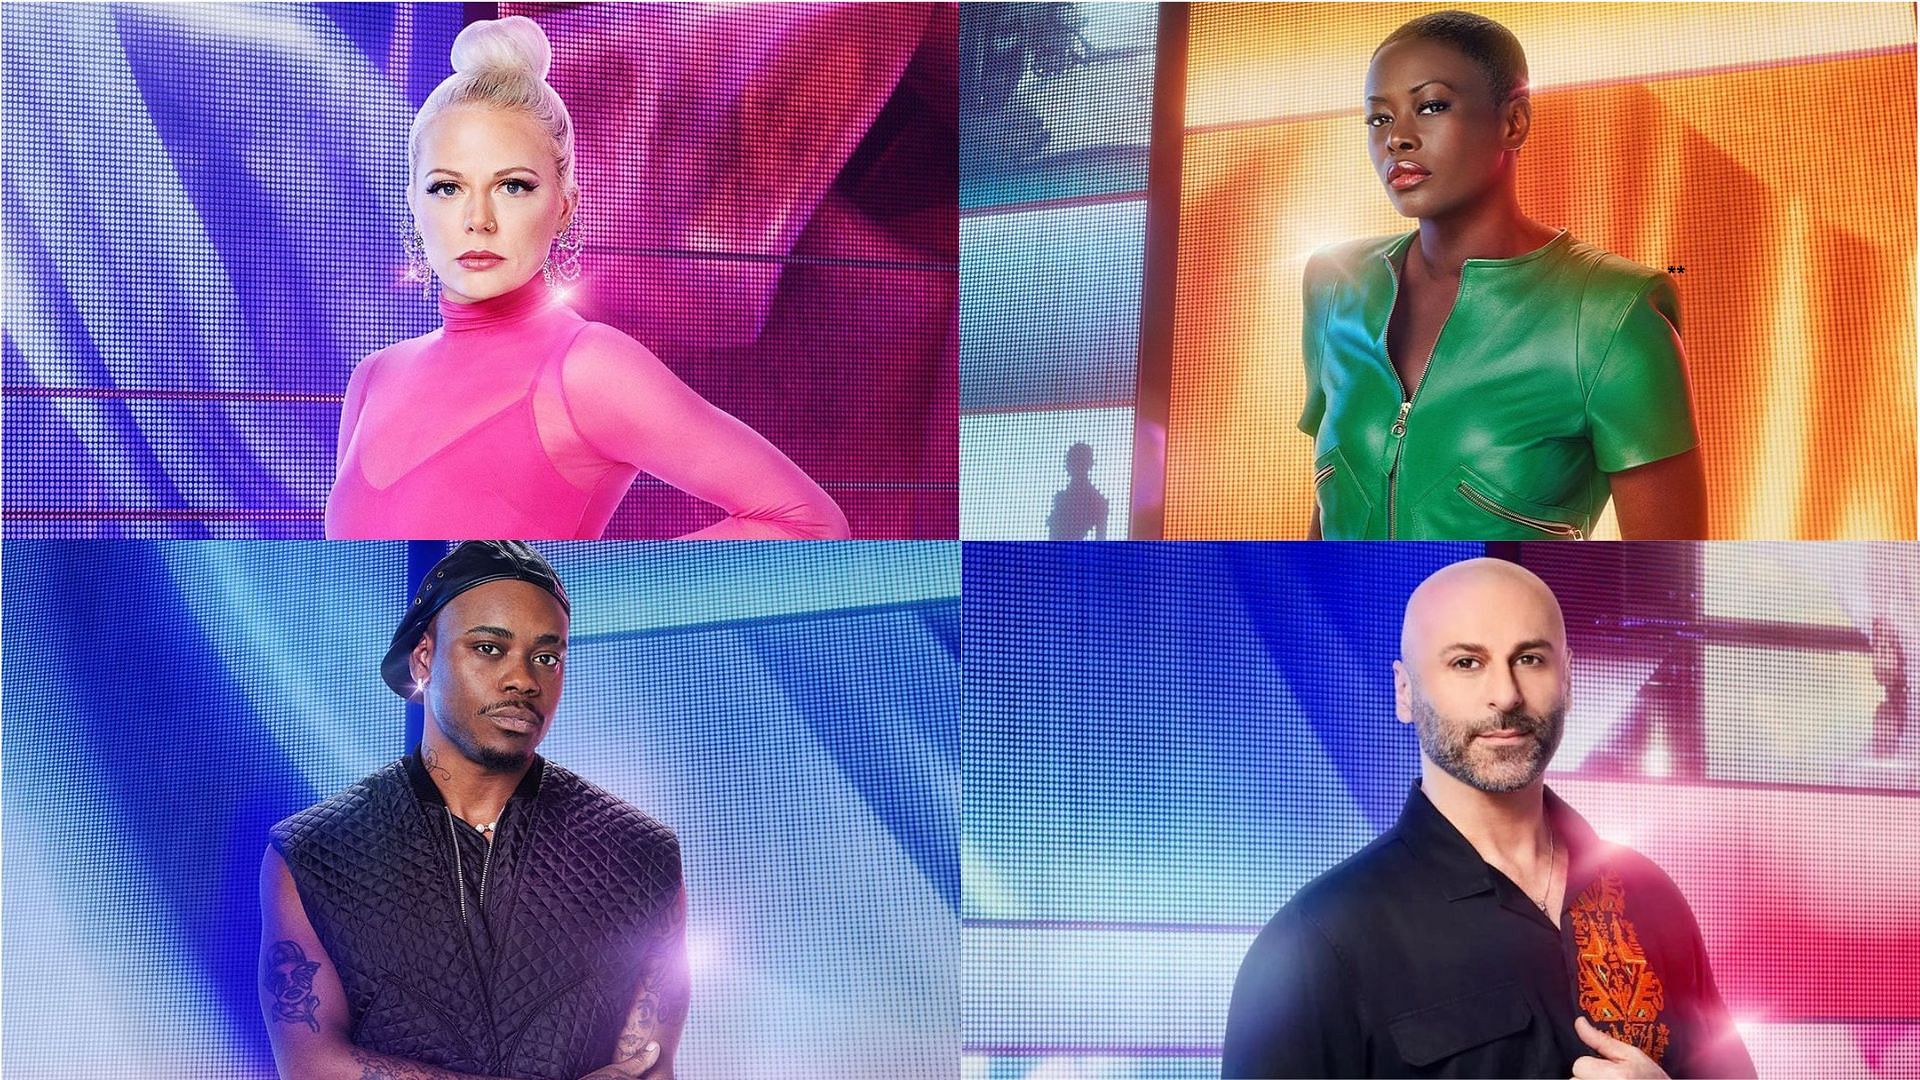 Project Runway season 20: Which three designers made it to the final?